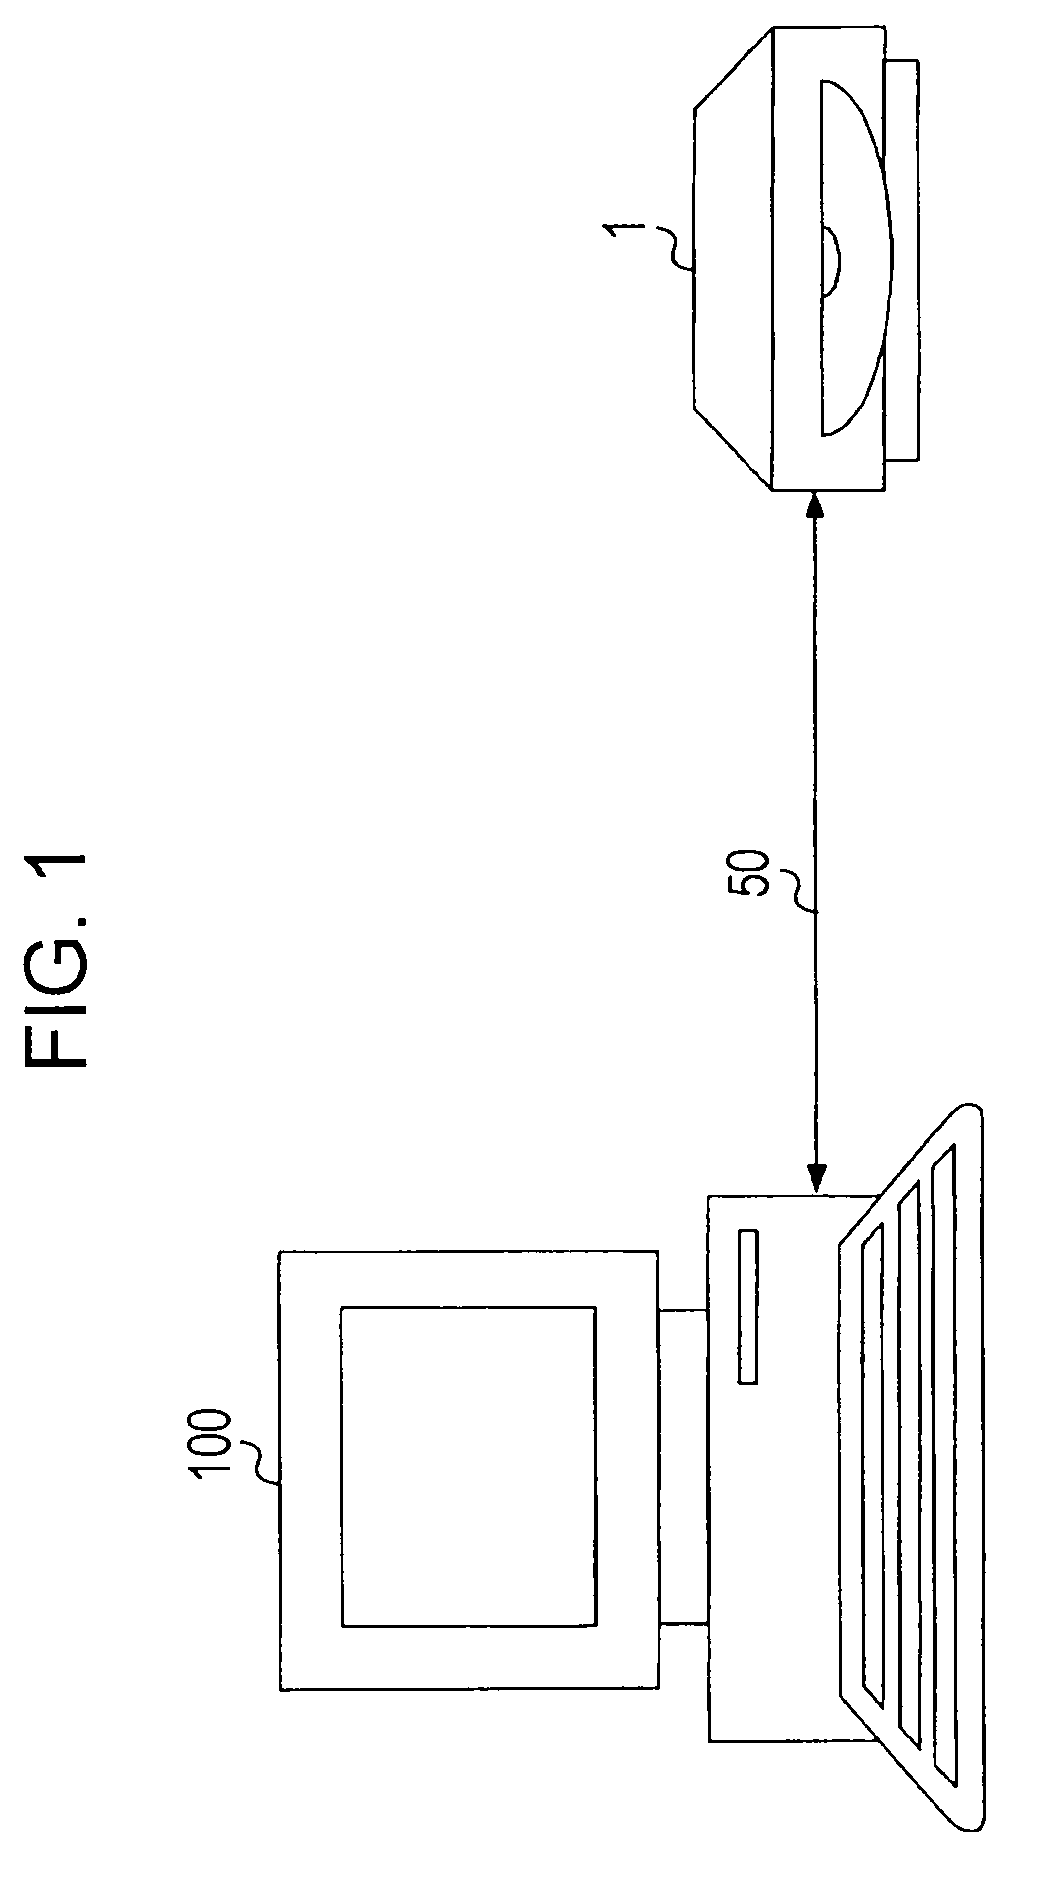 Peripheral device, method of operating peripheral device, host device, method of operating host device, and electronic device system